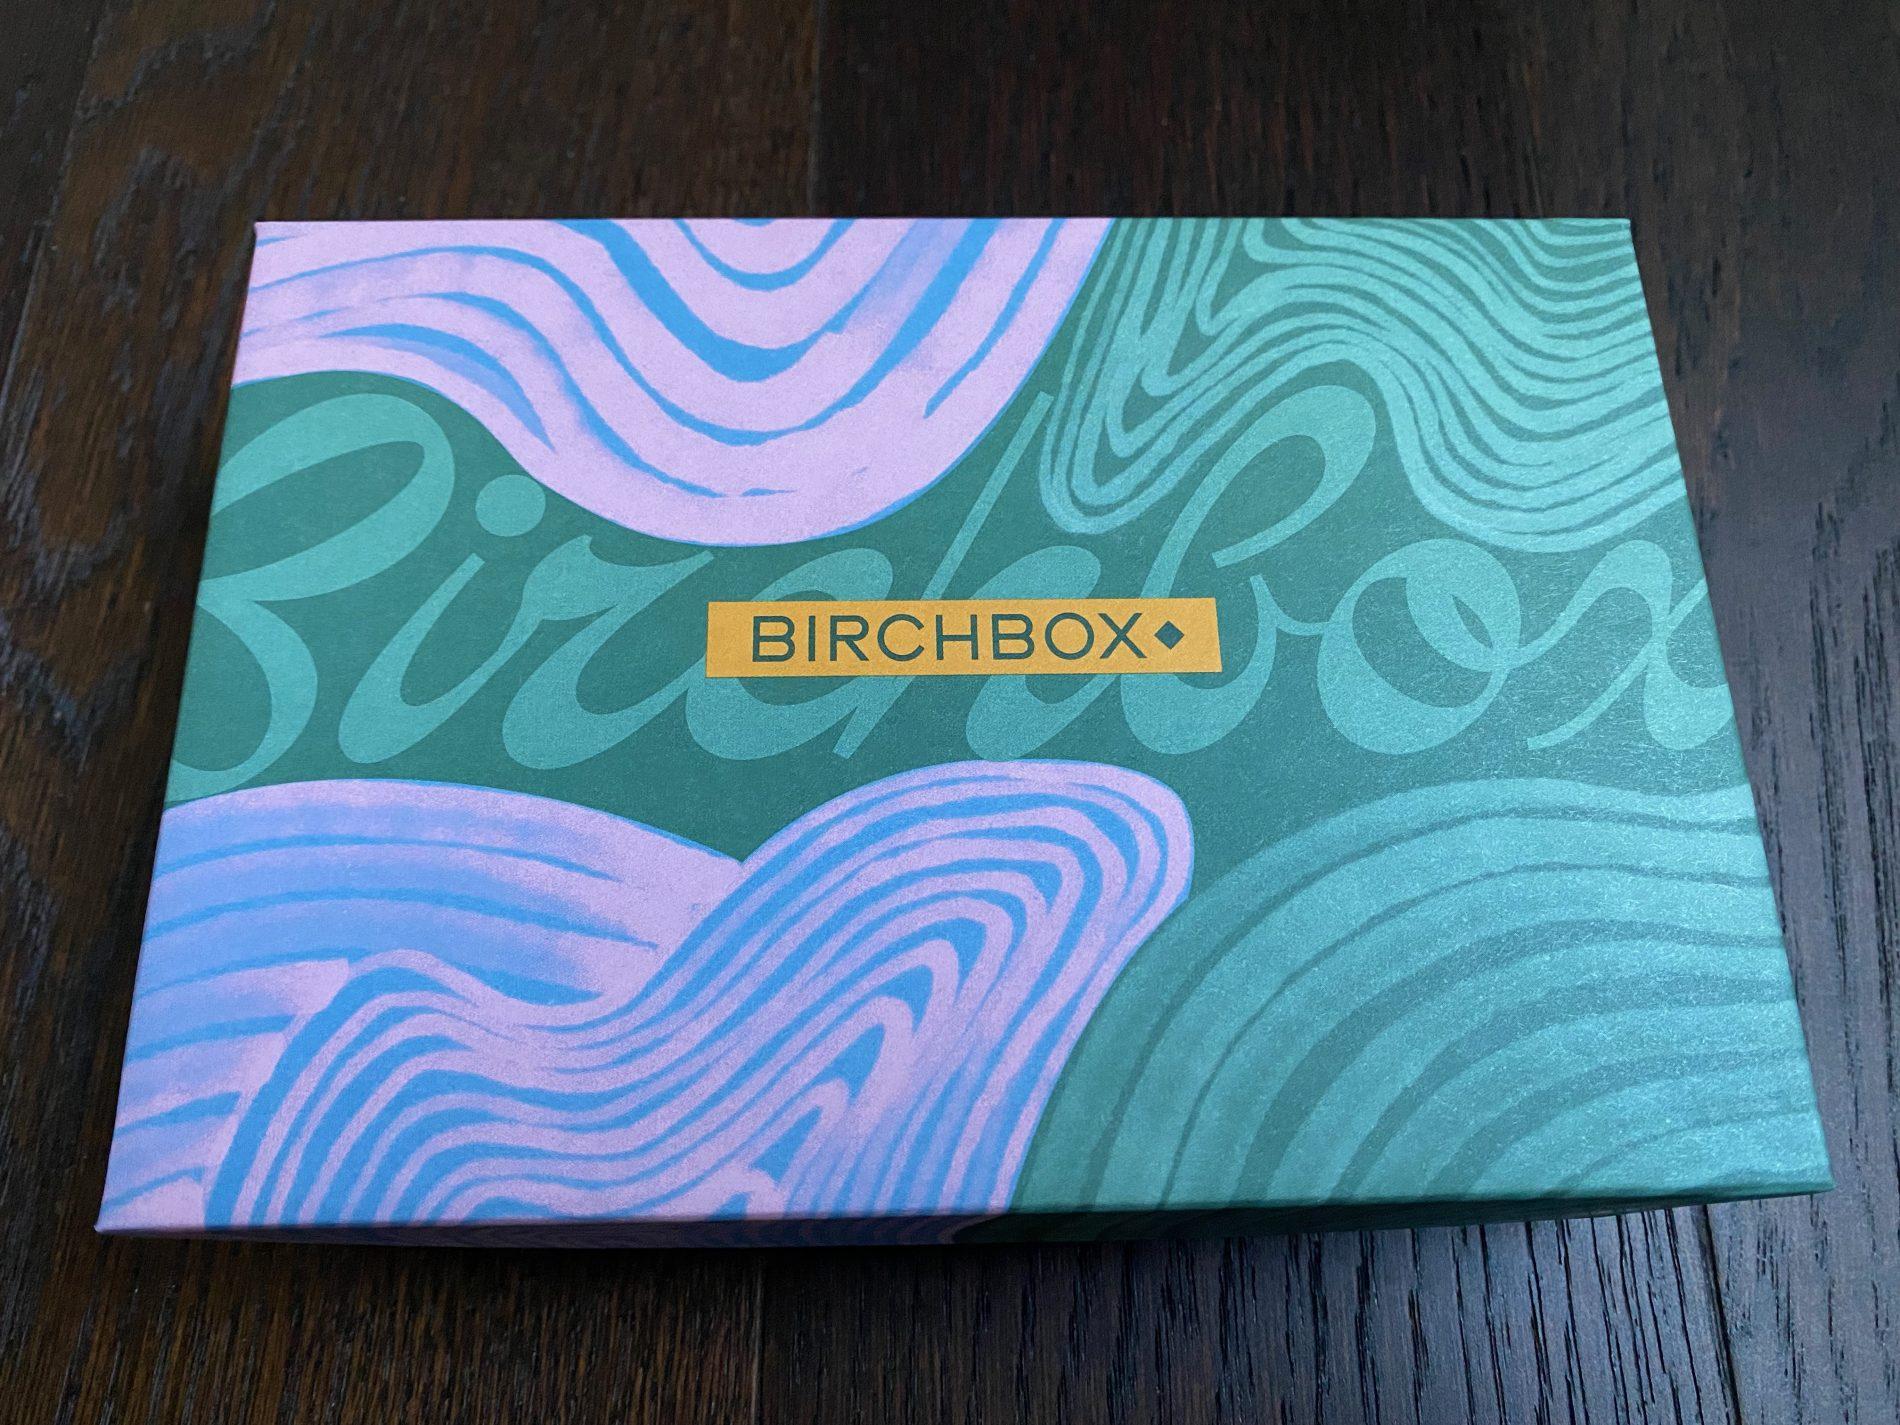 Read more about the article Birchbox has been Acquired by Femtec